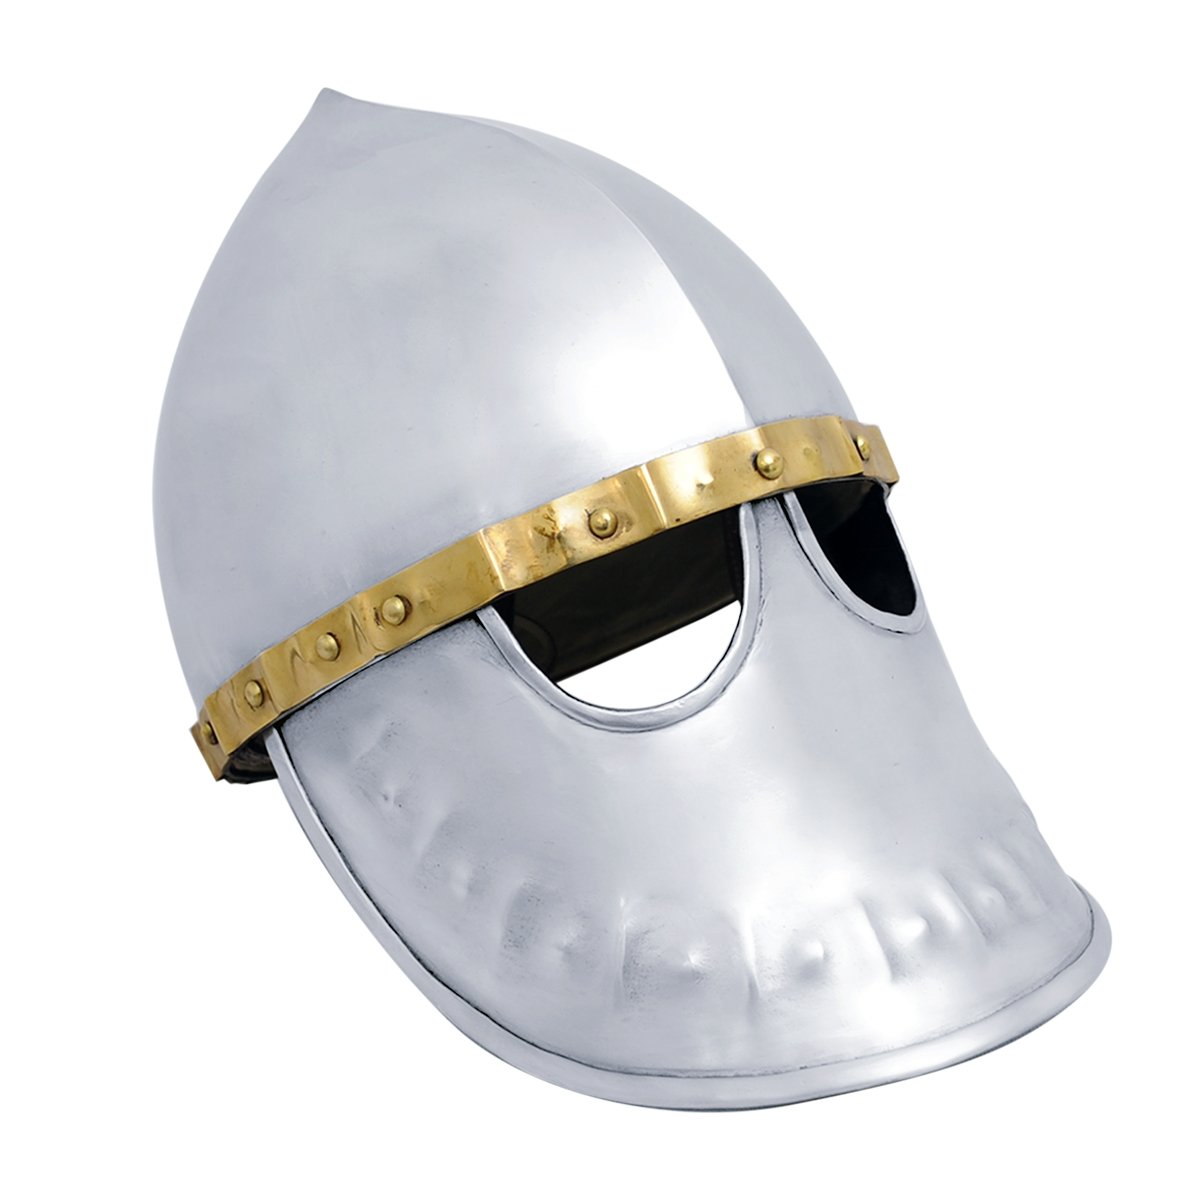 Italo Norman helmet with Face Plate C.1170, Size M